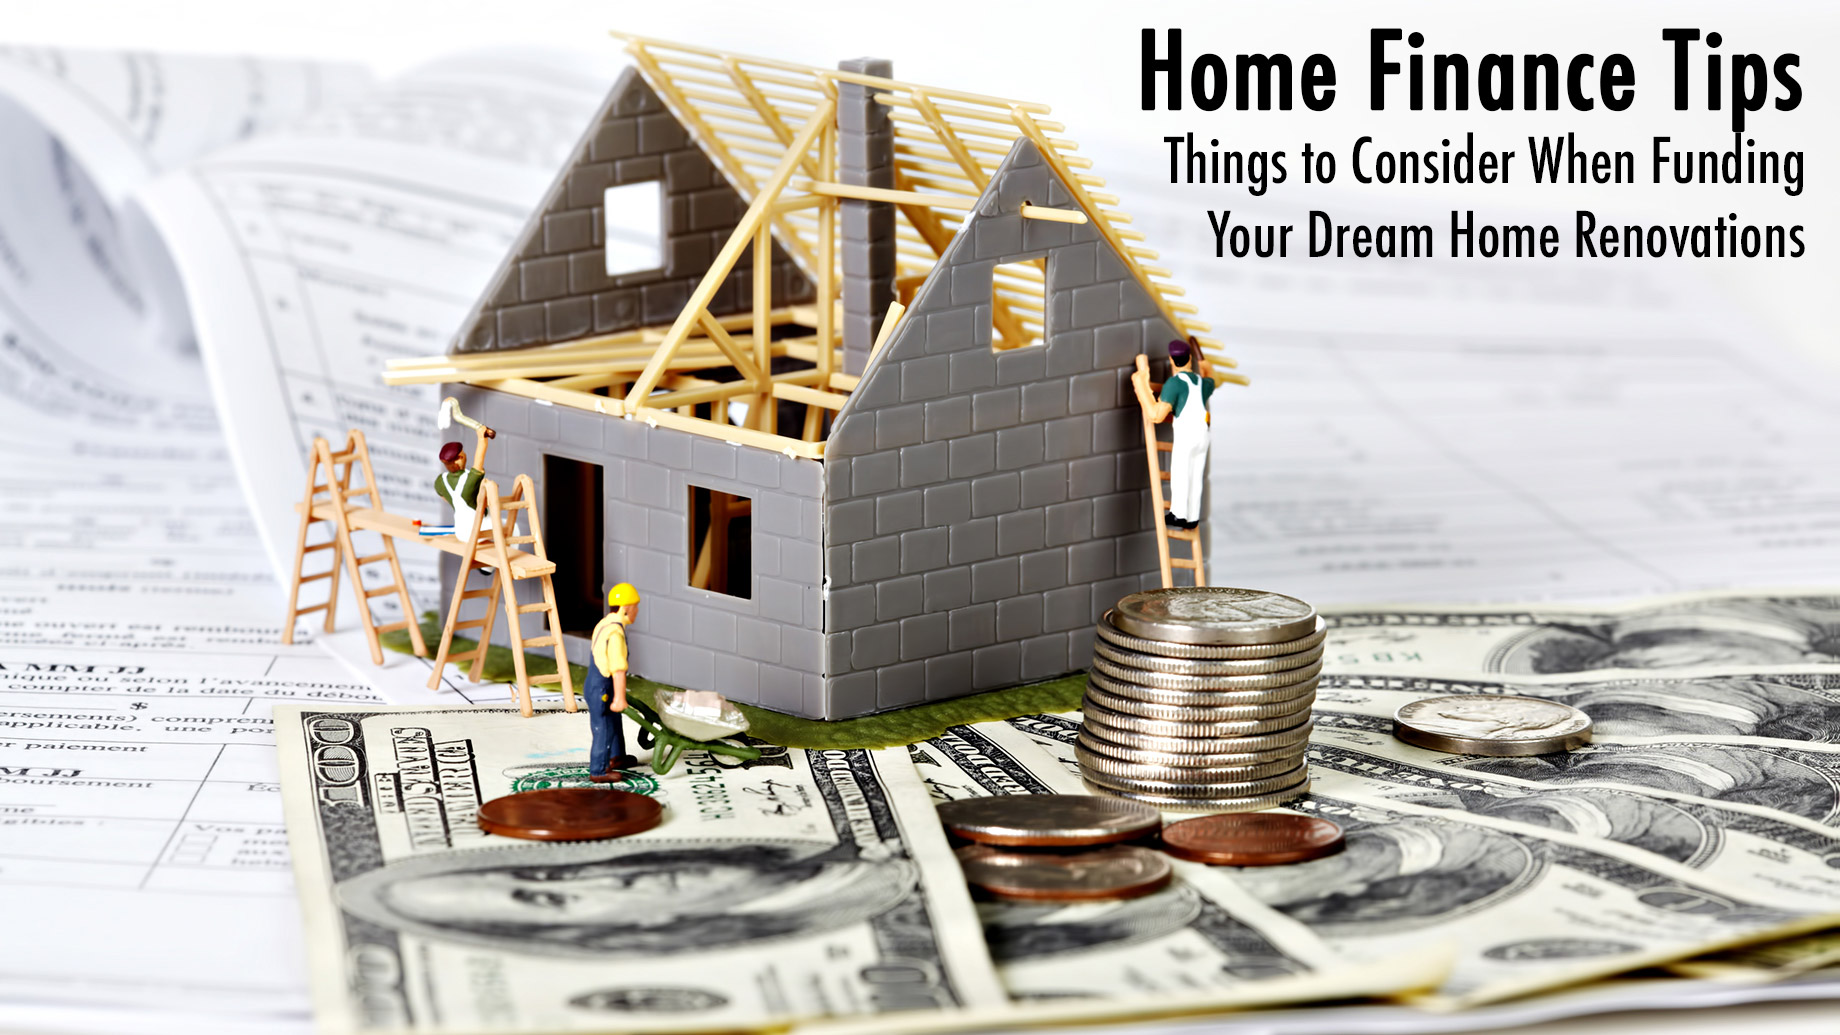 Home Finance Tips - Things to Consider When Funding Your Dream Home Renovations